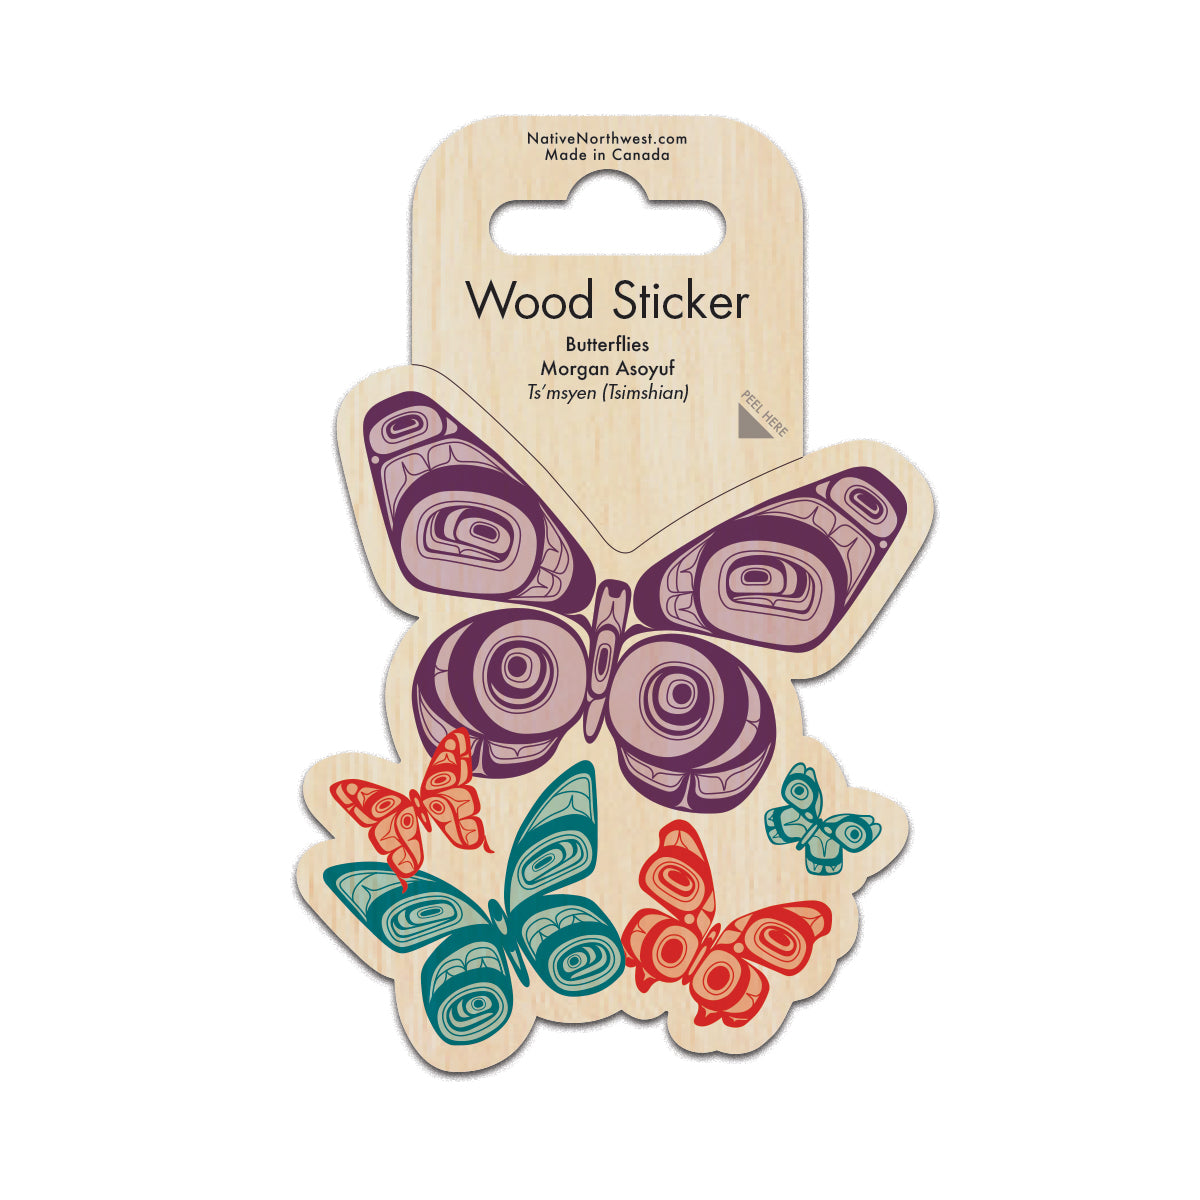 Wood Sticker Butterflies - Wood Sticker Butterflies -  - House of Himwitsa Native Art Gallery and Gifts